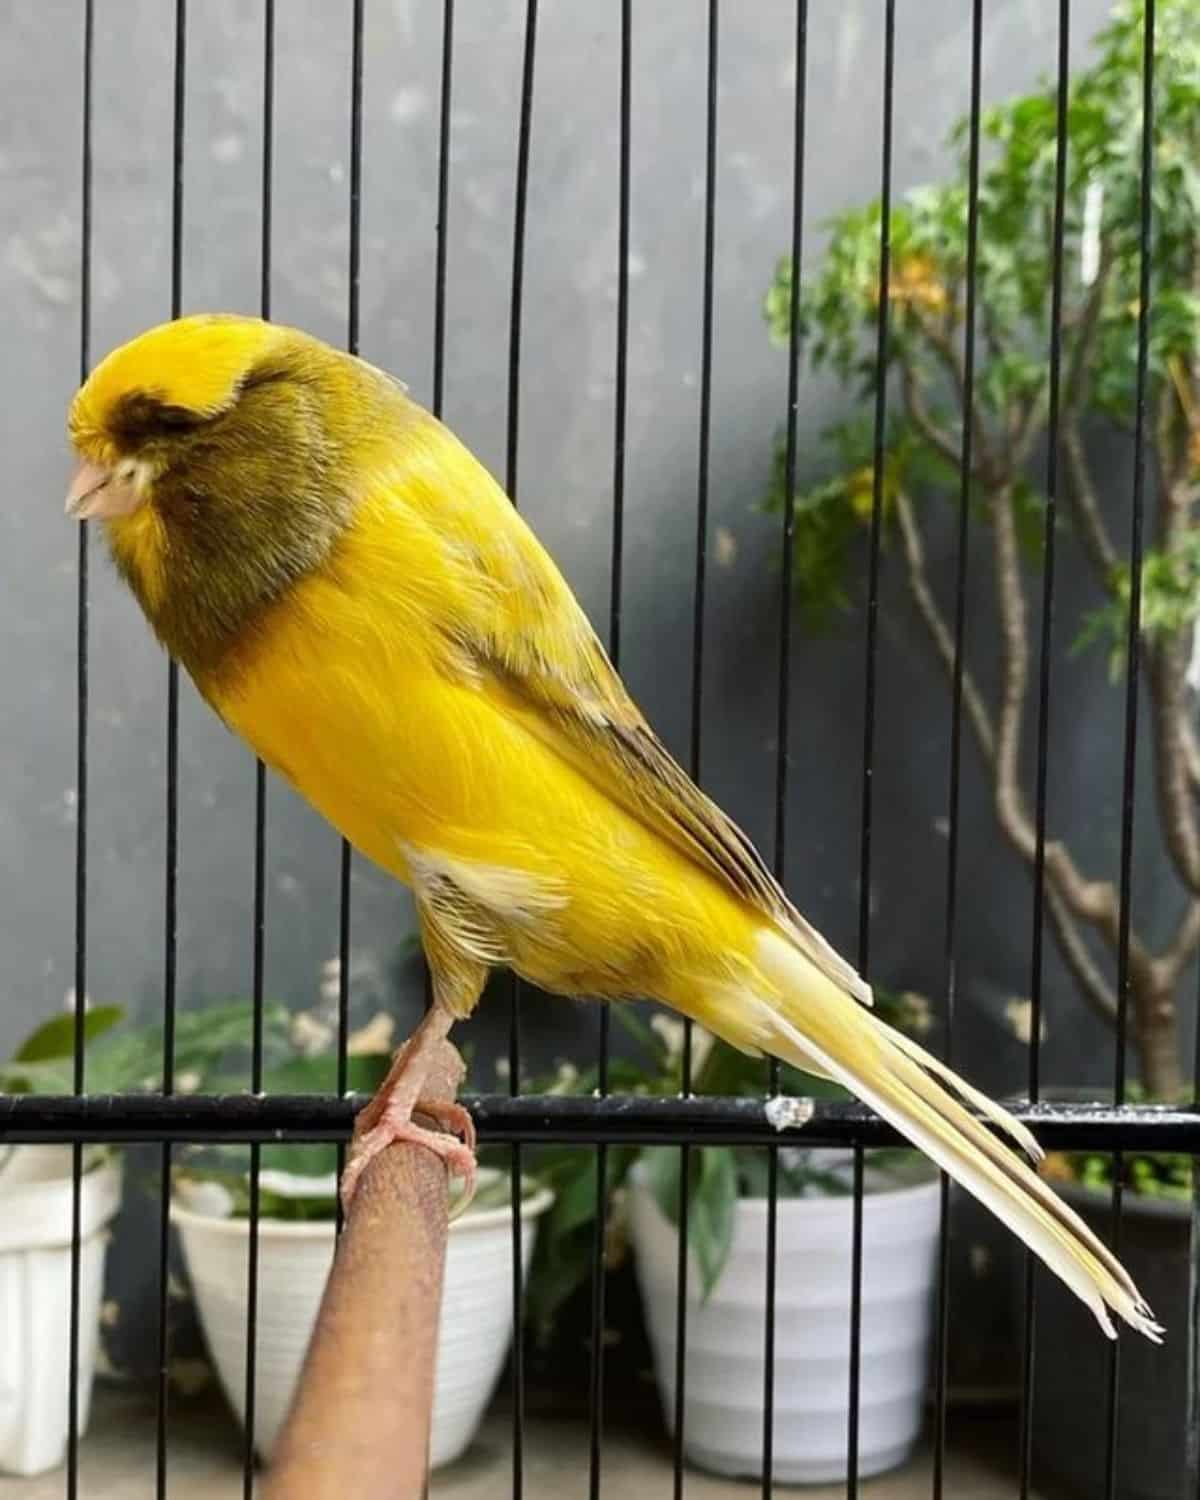 A beautiful Canary perched in a cage.